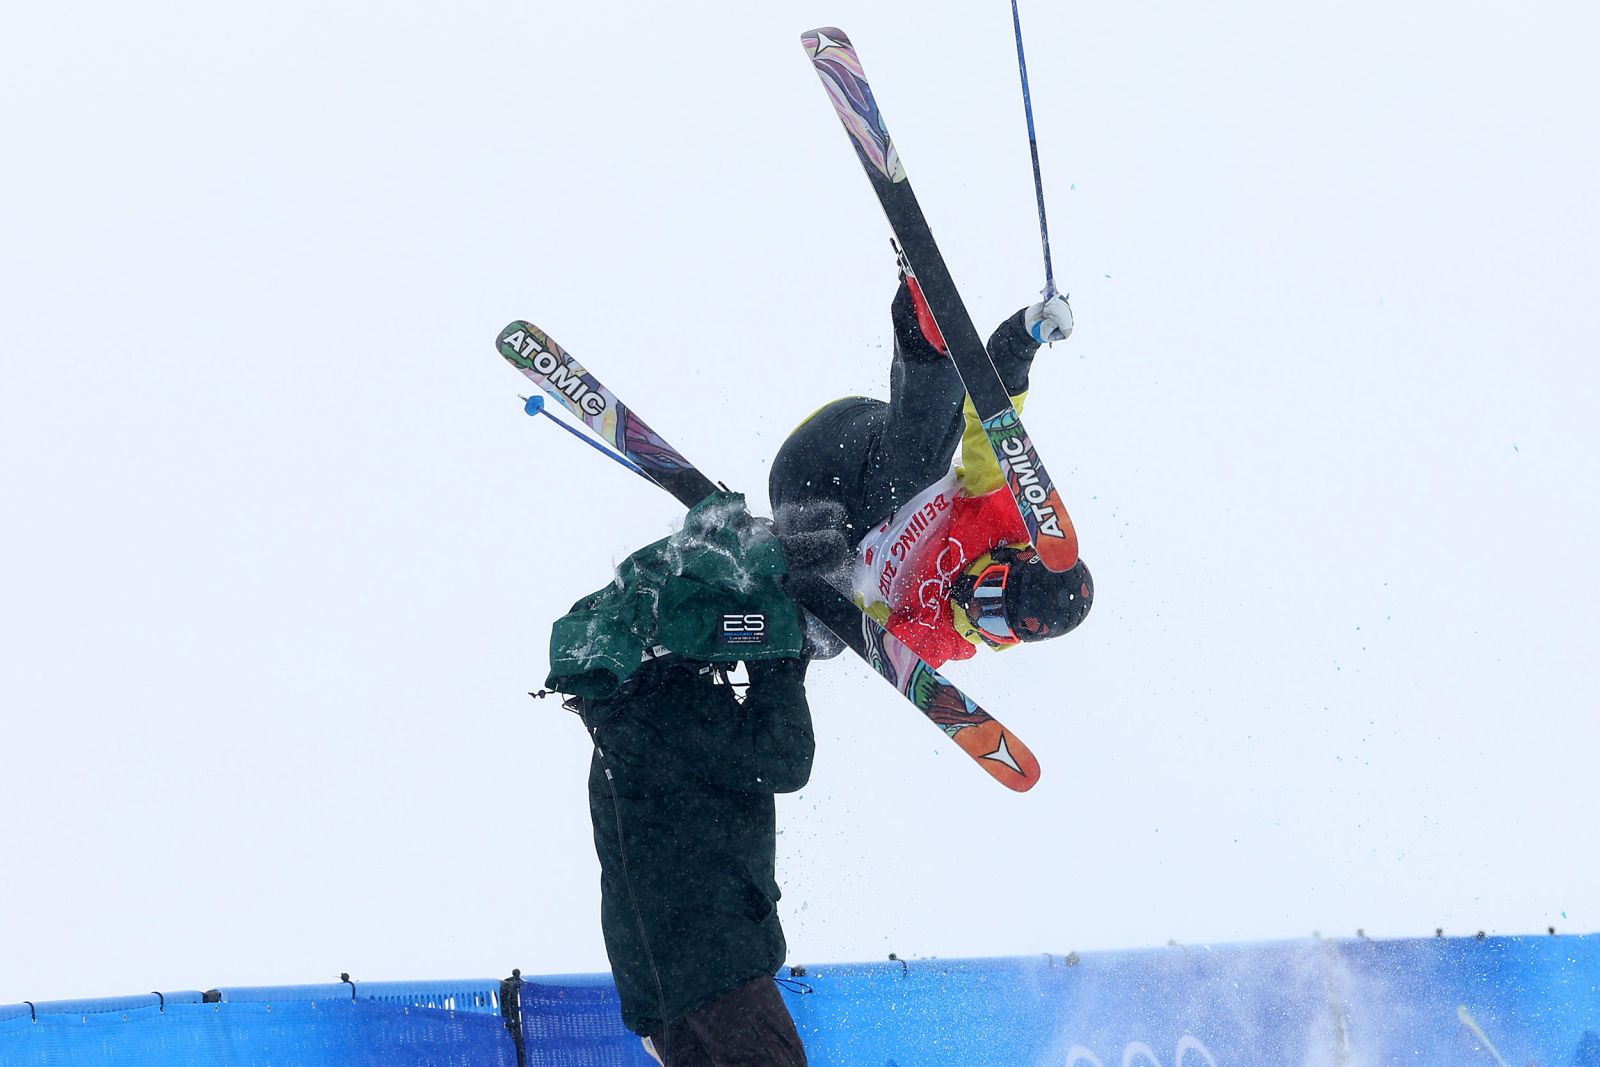 Finland's Jon Sallinen crashes into a cameraman during halfpipe qualification on February 17. Both Sallinen and the cameraman — as well as the video footage — were fine. However, as a result of the crash, Sallinen ended up in last place.